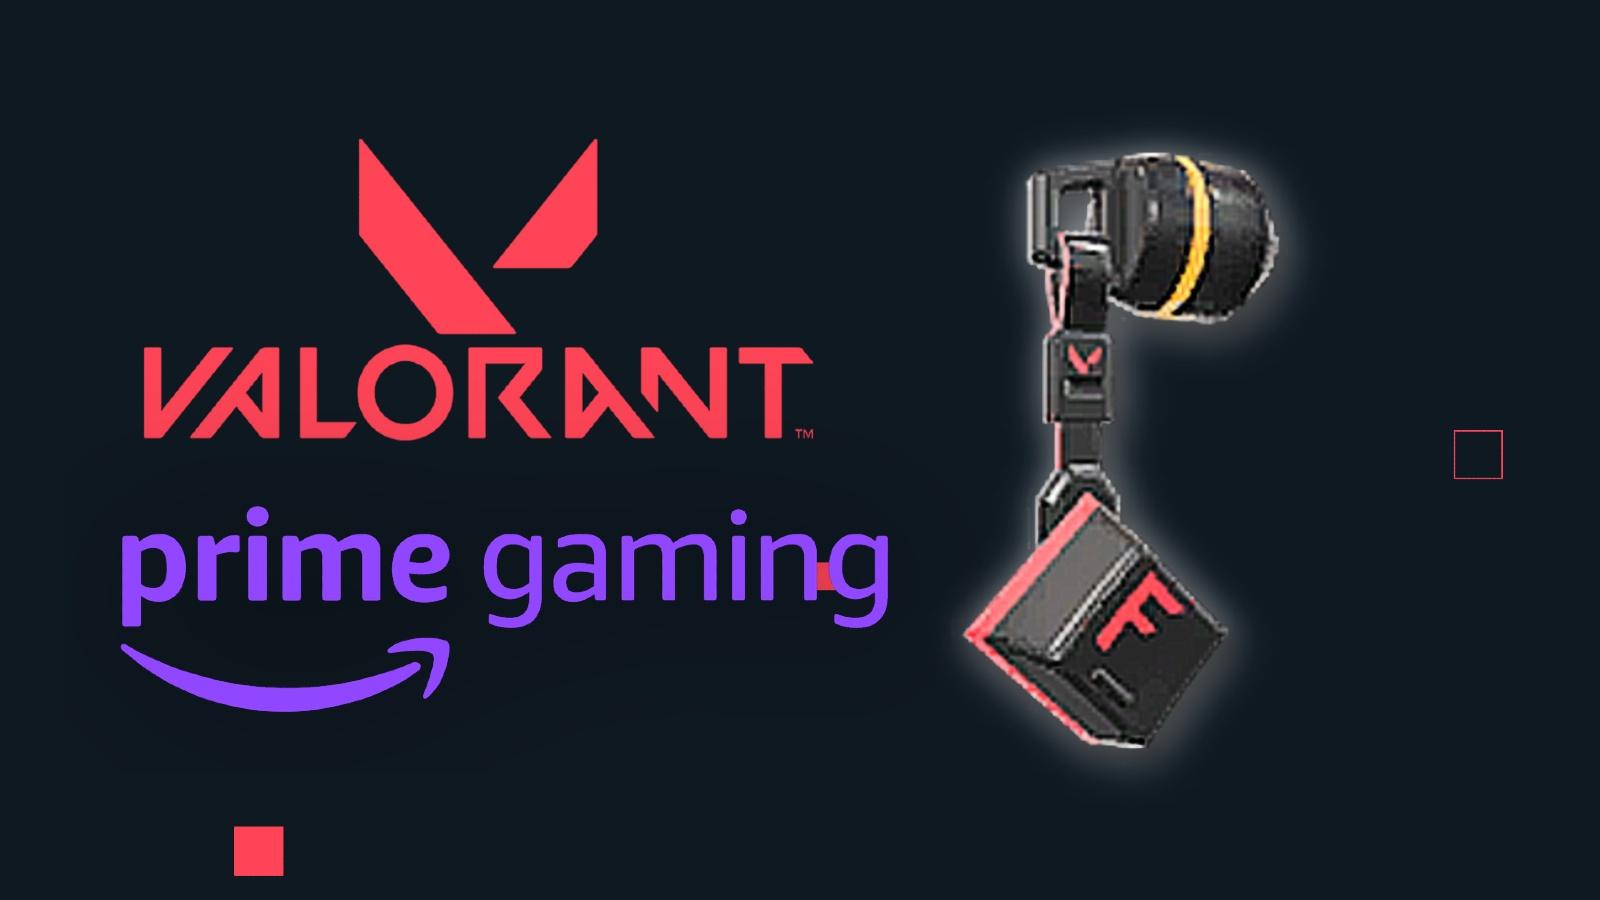 Valorant - Tower of Power Gun Buddy FREE with Prime Gaming!